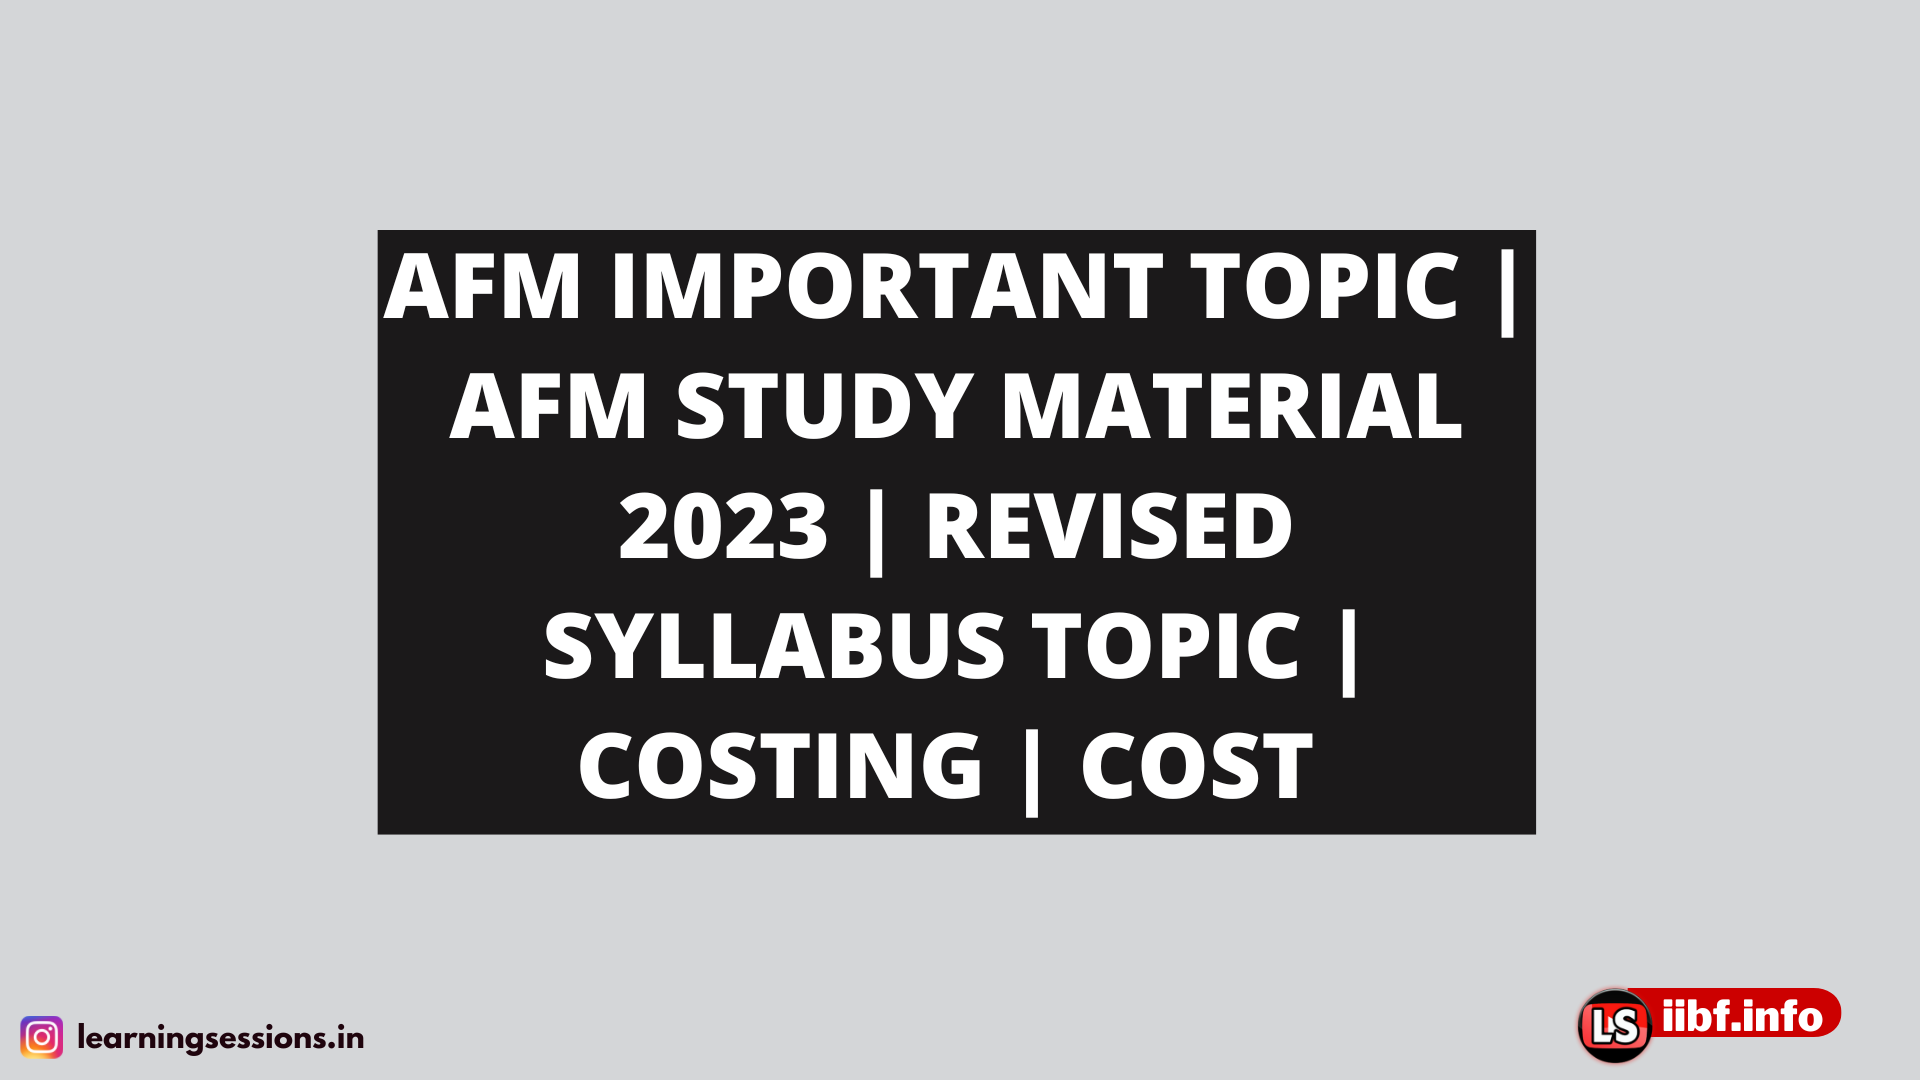 AFM IMPORTANT TOPIC | AFM STUDY MATERIAL 2023 | REVISED SYLLABUS TOPIC | COSTING | COST 